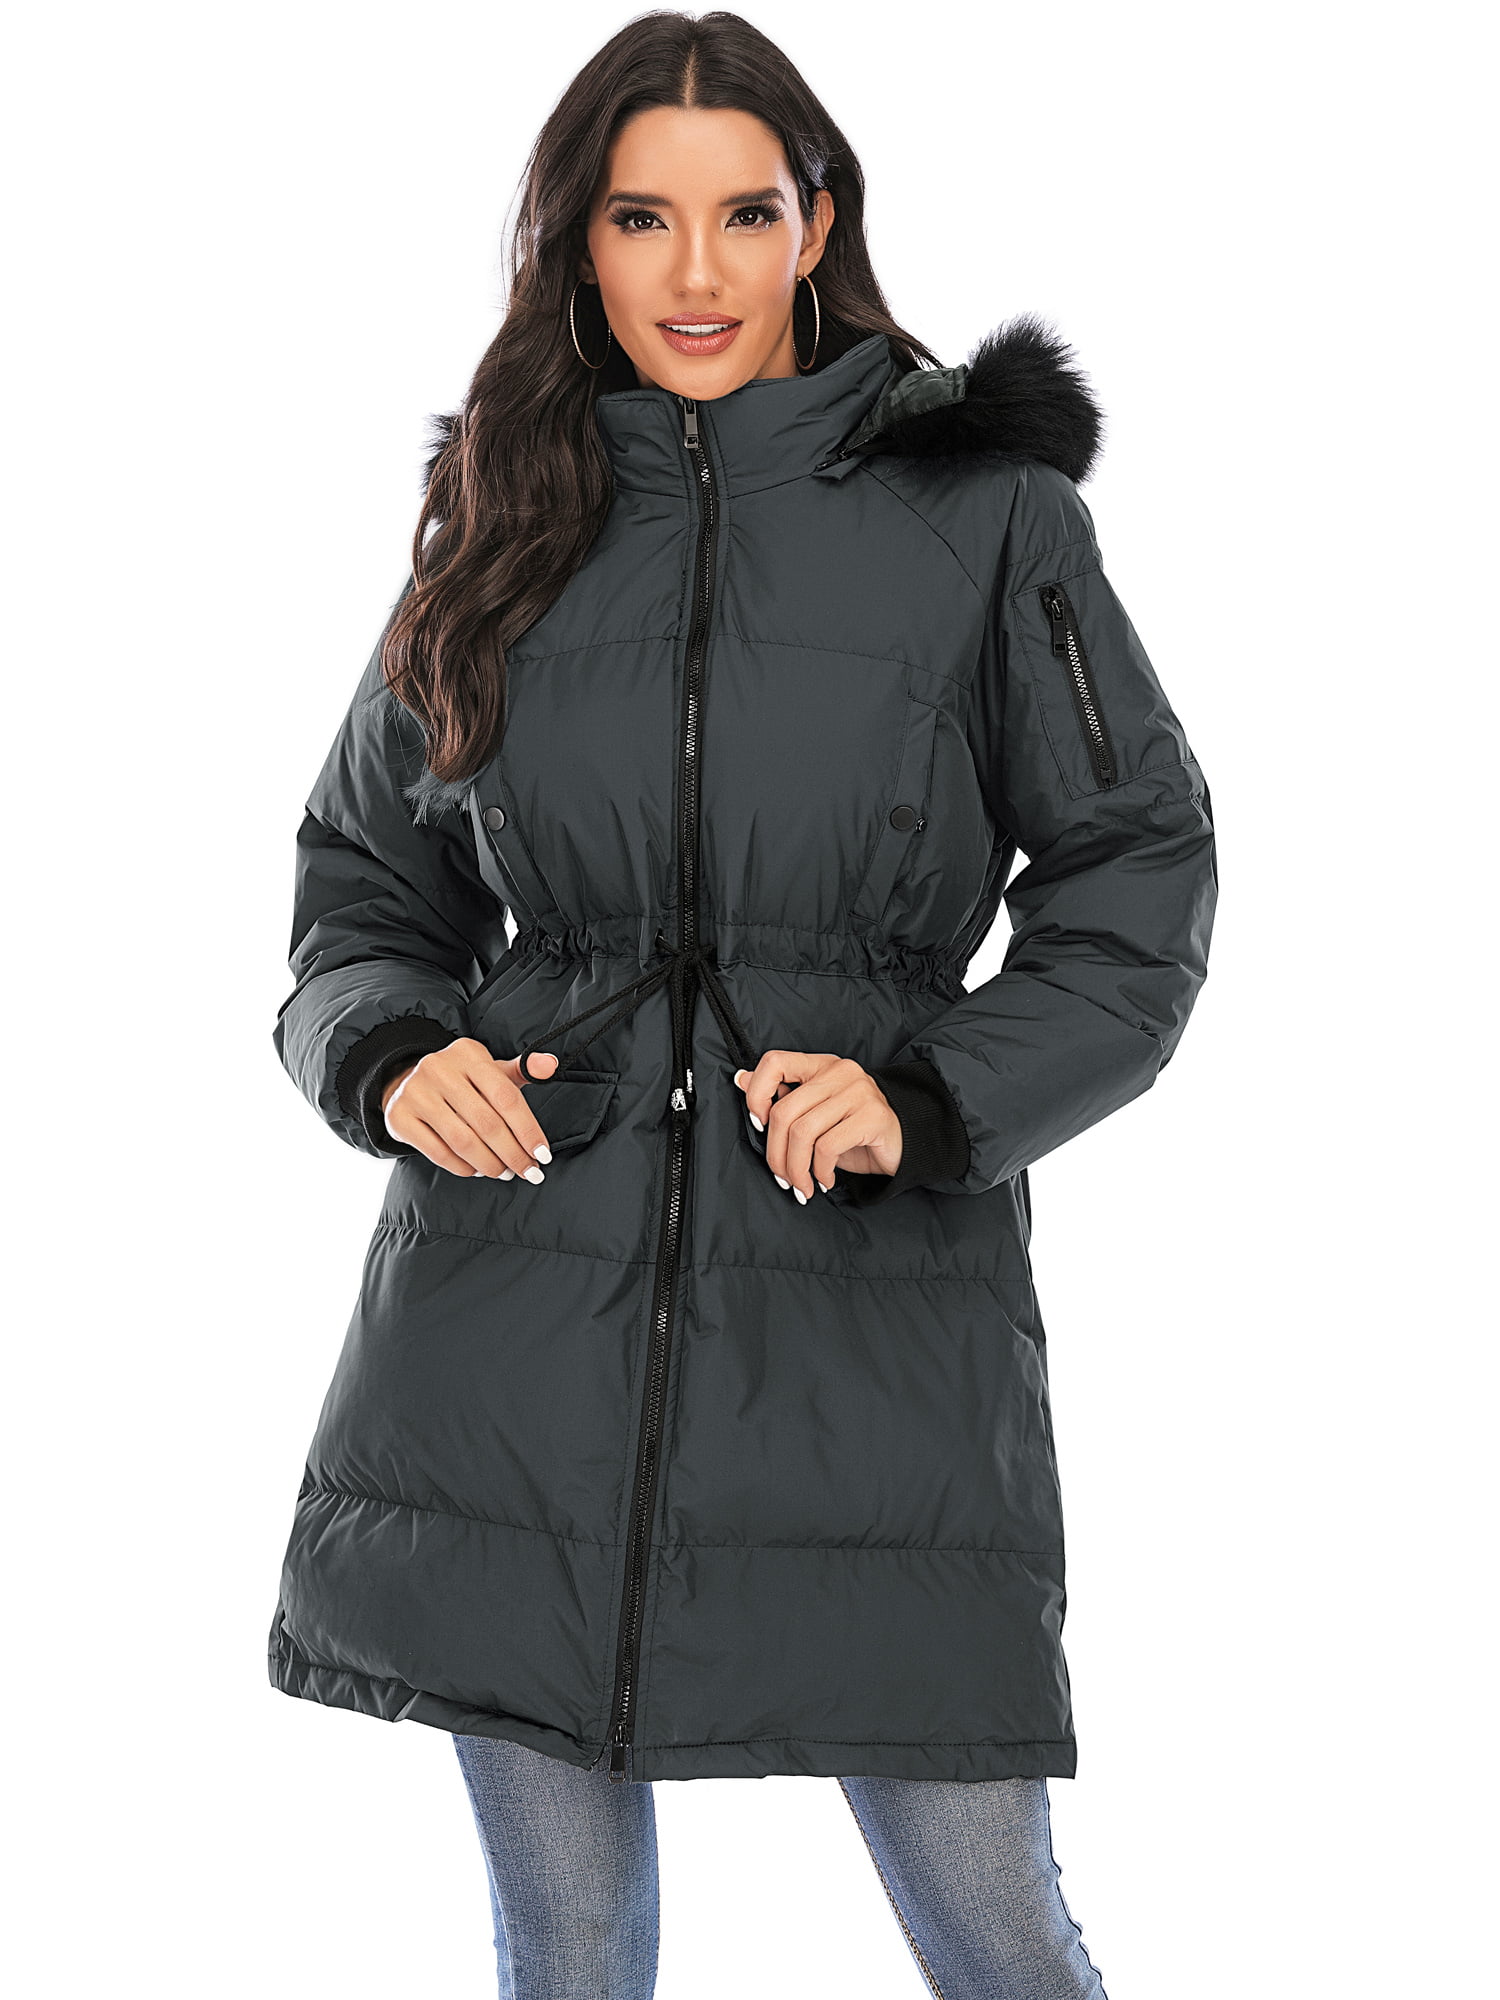 Women Thickened Long Down Jacket Hooded Maxi Winter Puffer Outerwear Parka Coat with Belt